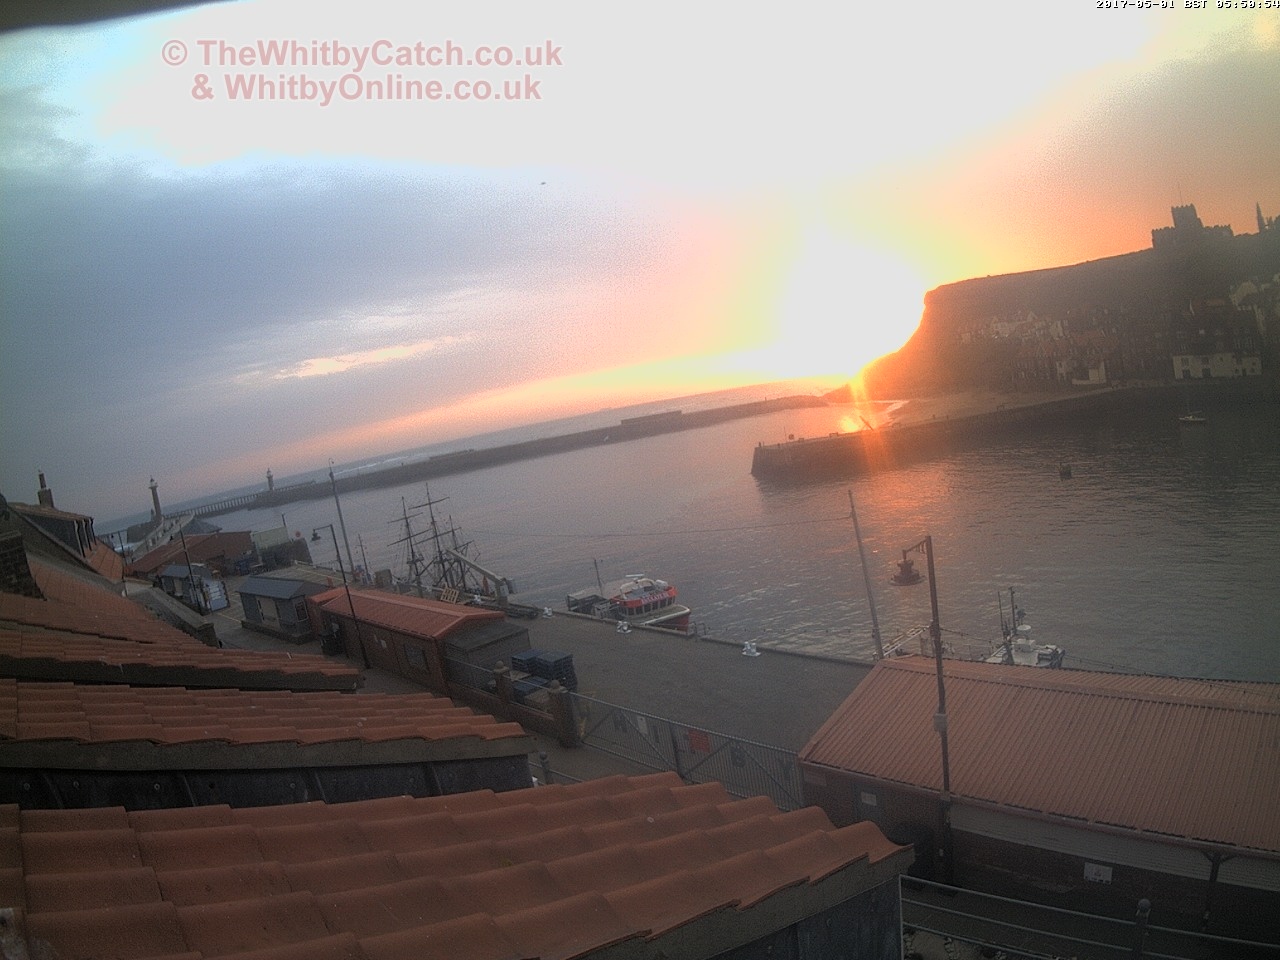 Whitby Mon 1st May 2017 05:51.